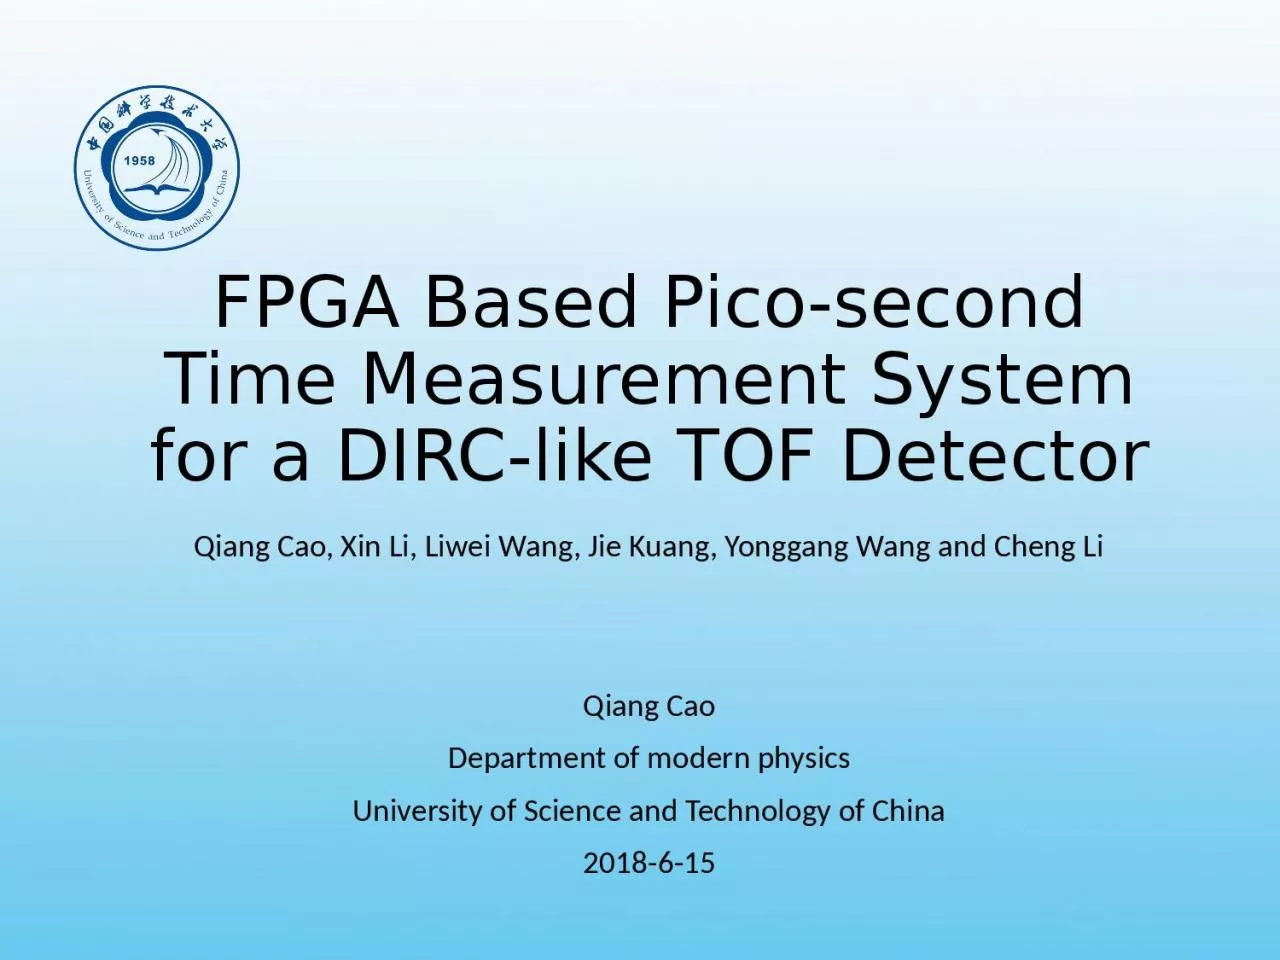 FPGA Based Pico-second Time Measurement System for a DIRC-like TOF Detector